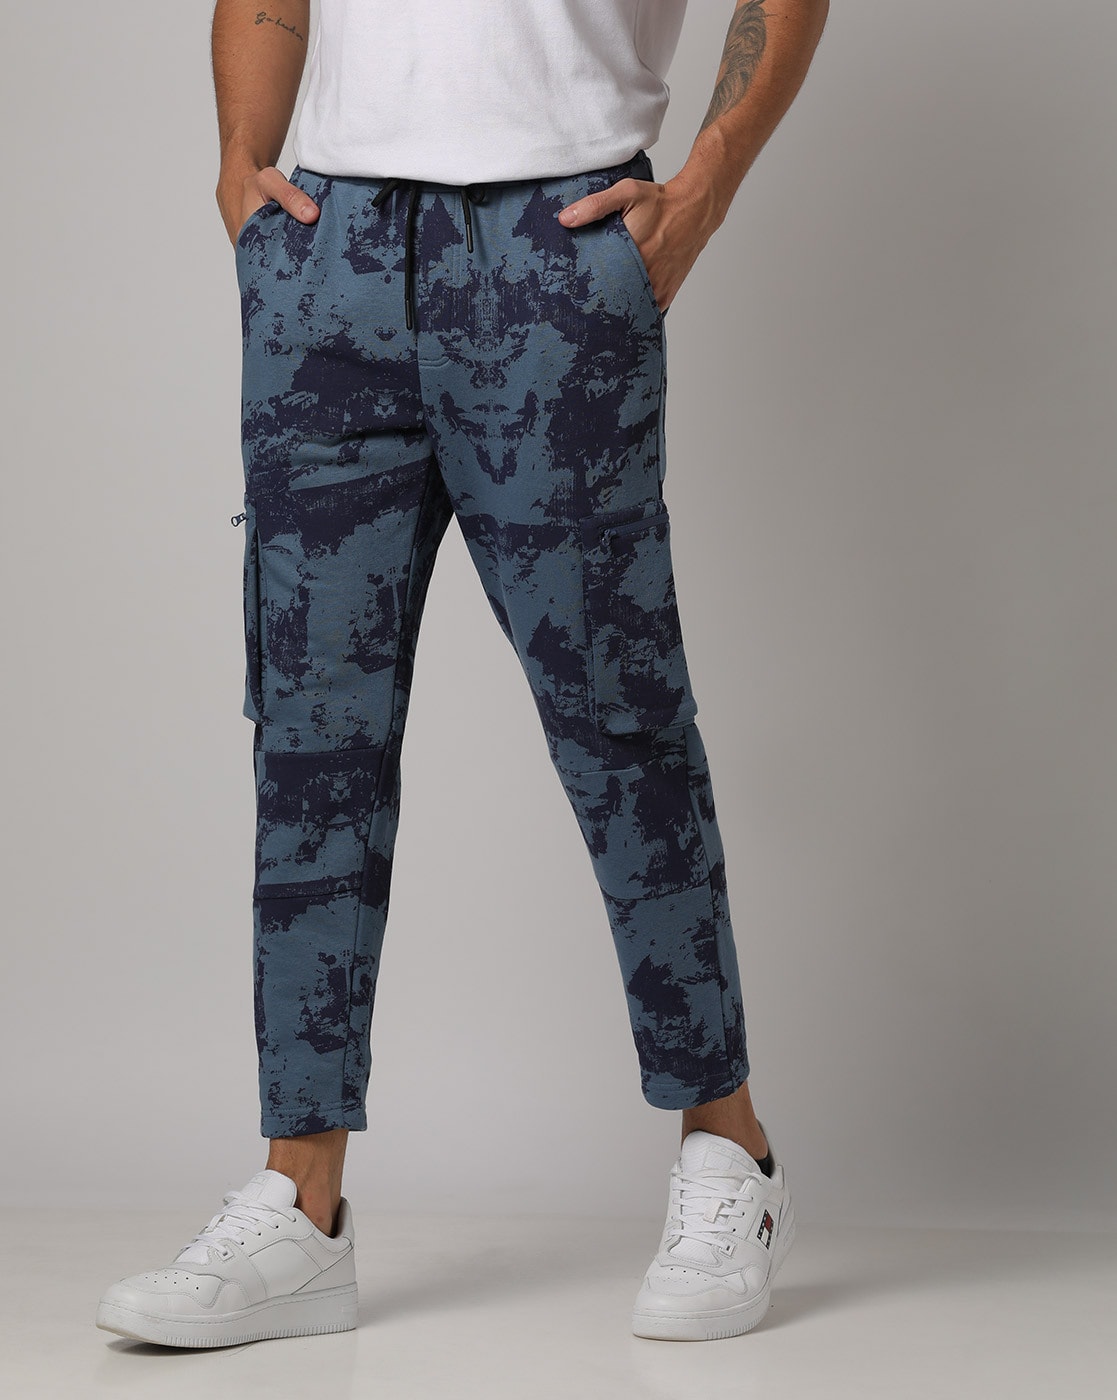 NWT Men's Nathan Blue White Camouflage Camo Belted Cargo Pants ALL  SIZES/LENGTHS | eBay